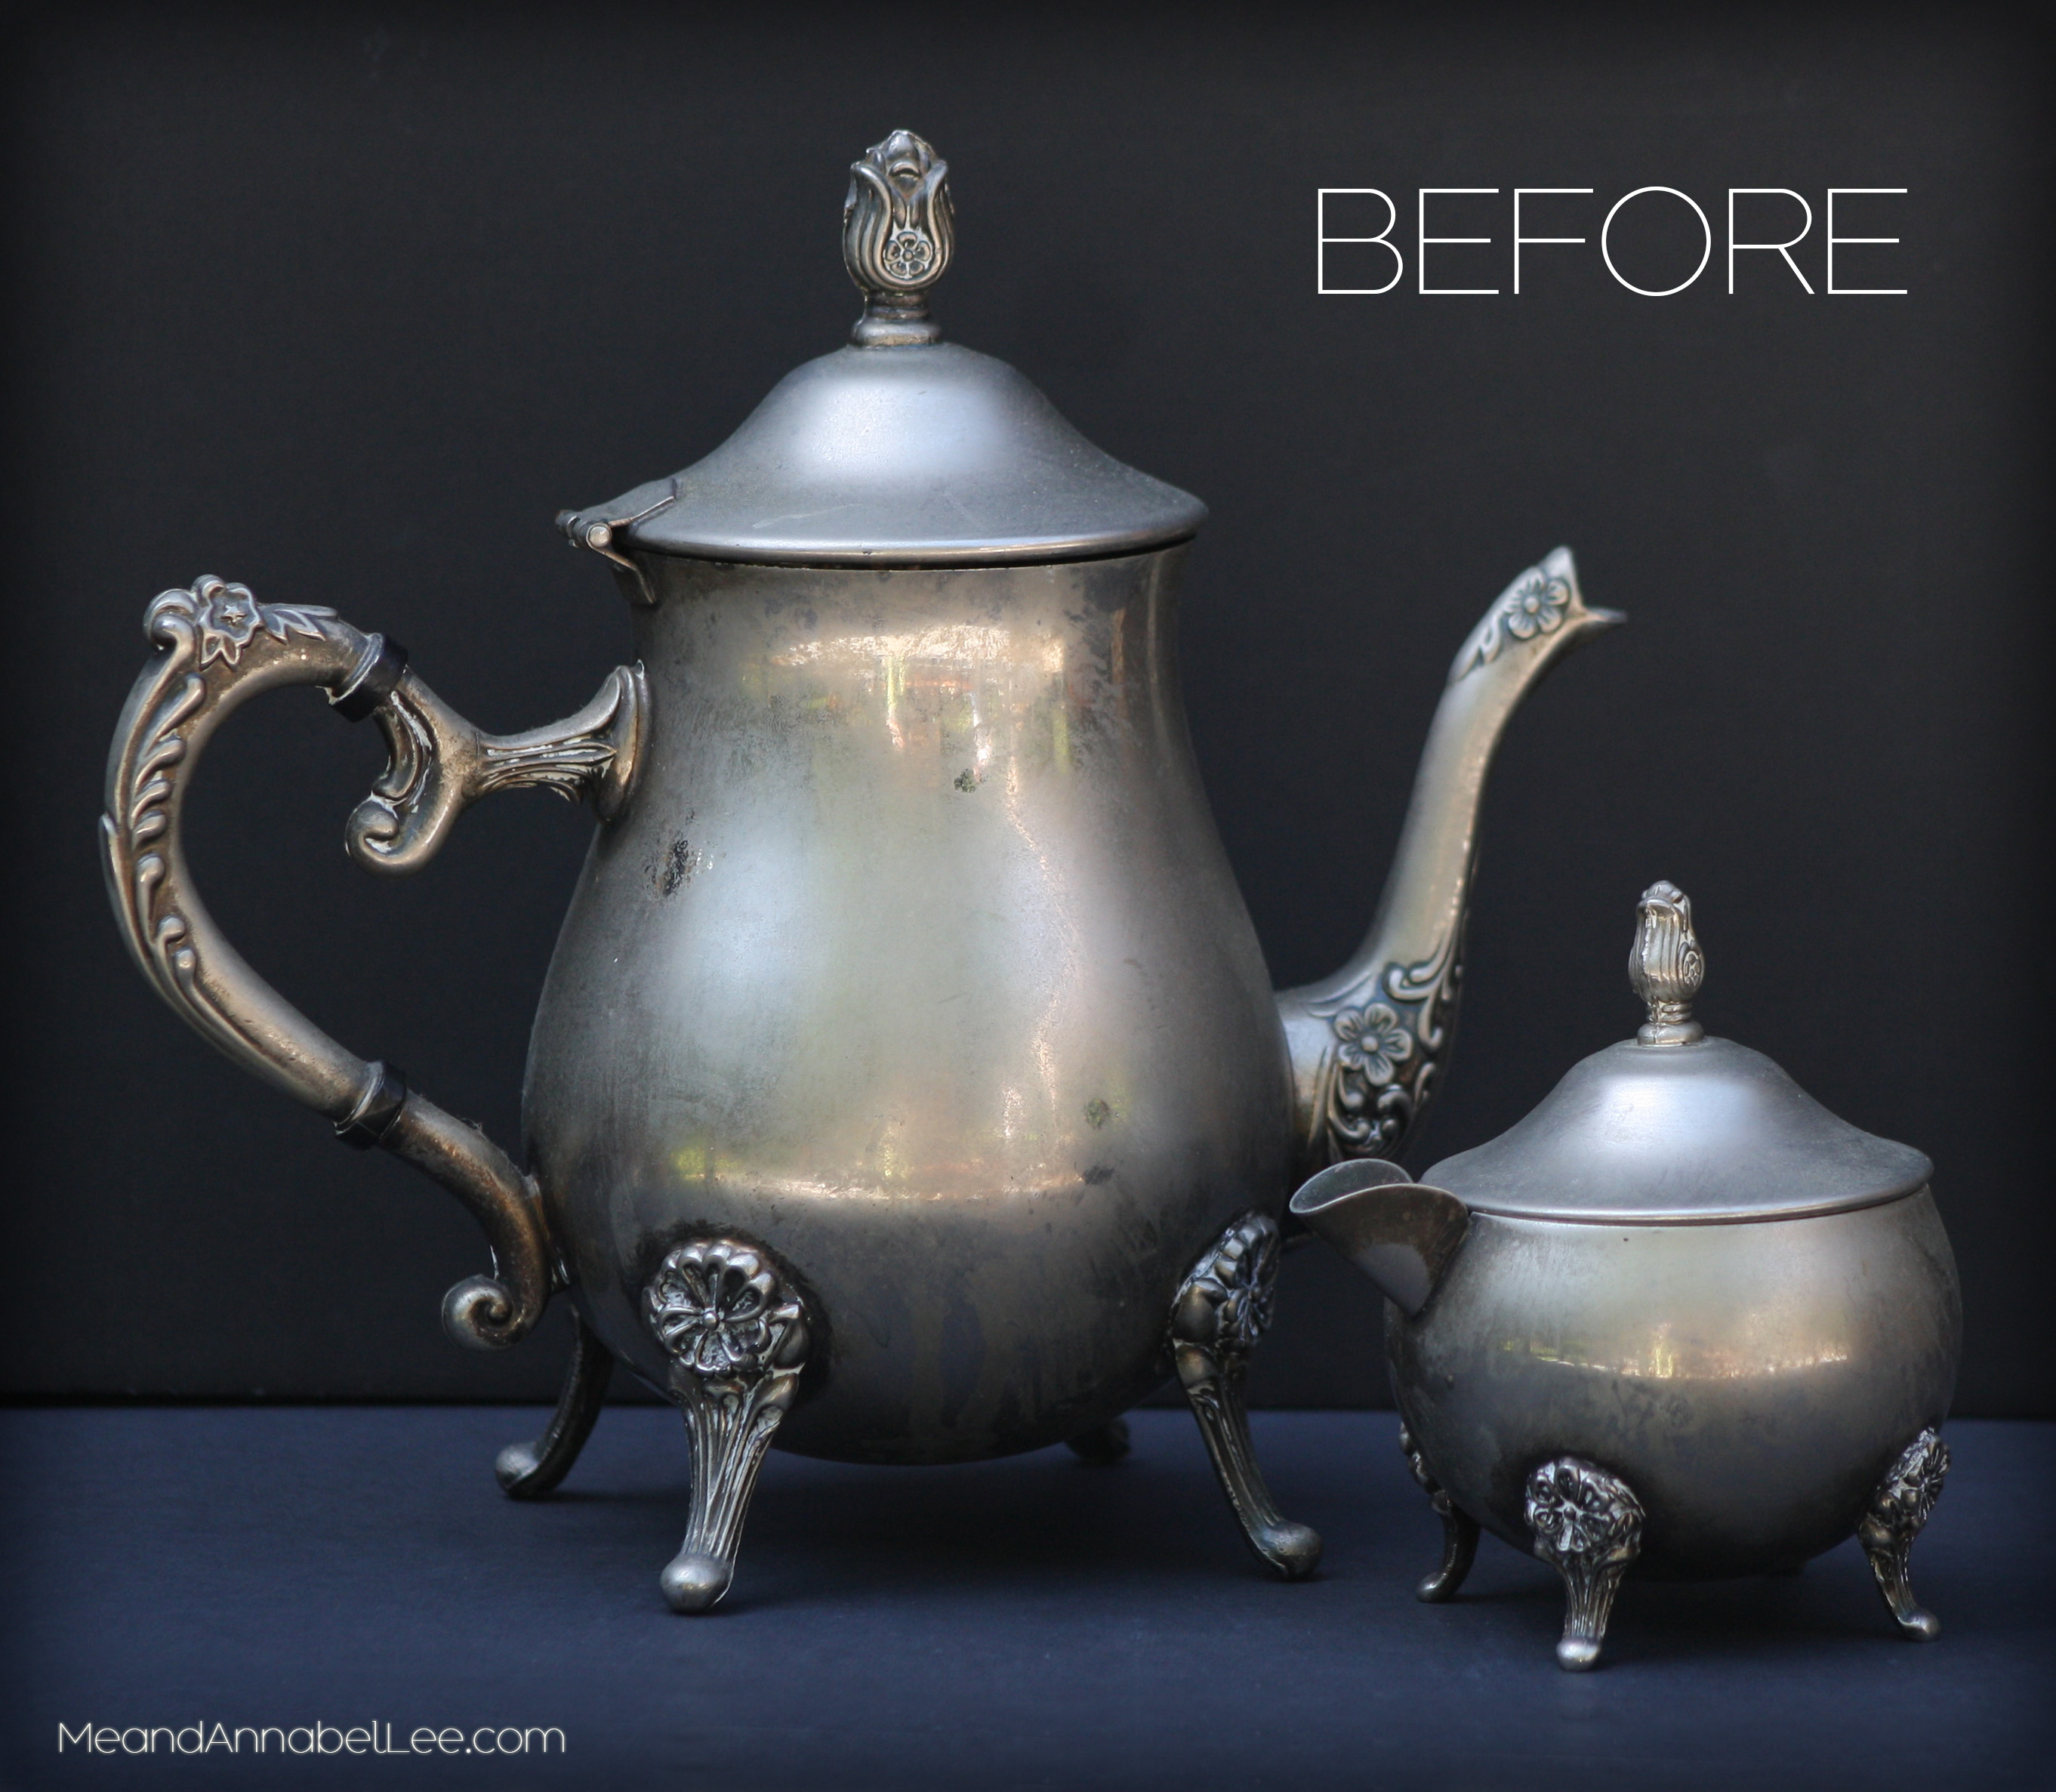 BEFORE - DIY Black & Gold Victorian Gothic Tea Set - Goth entertaining & Home Decor - www.MeandAnnabelLee.com - Blog for all things Dark, Gothic, Victorian, & Unusual